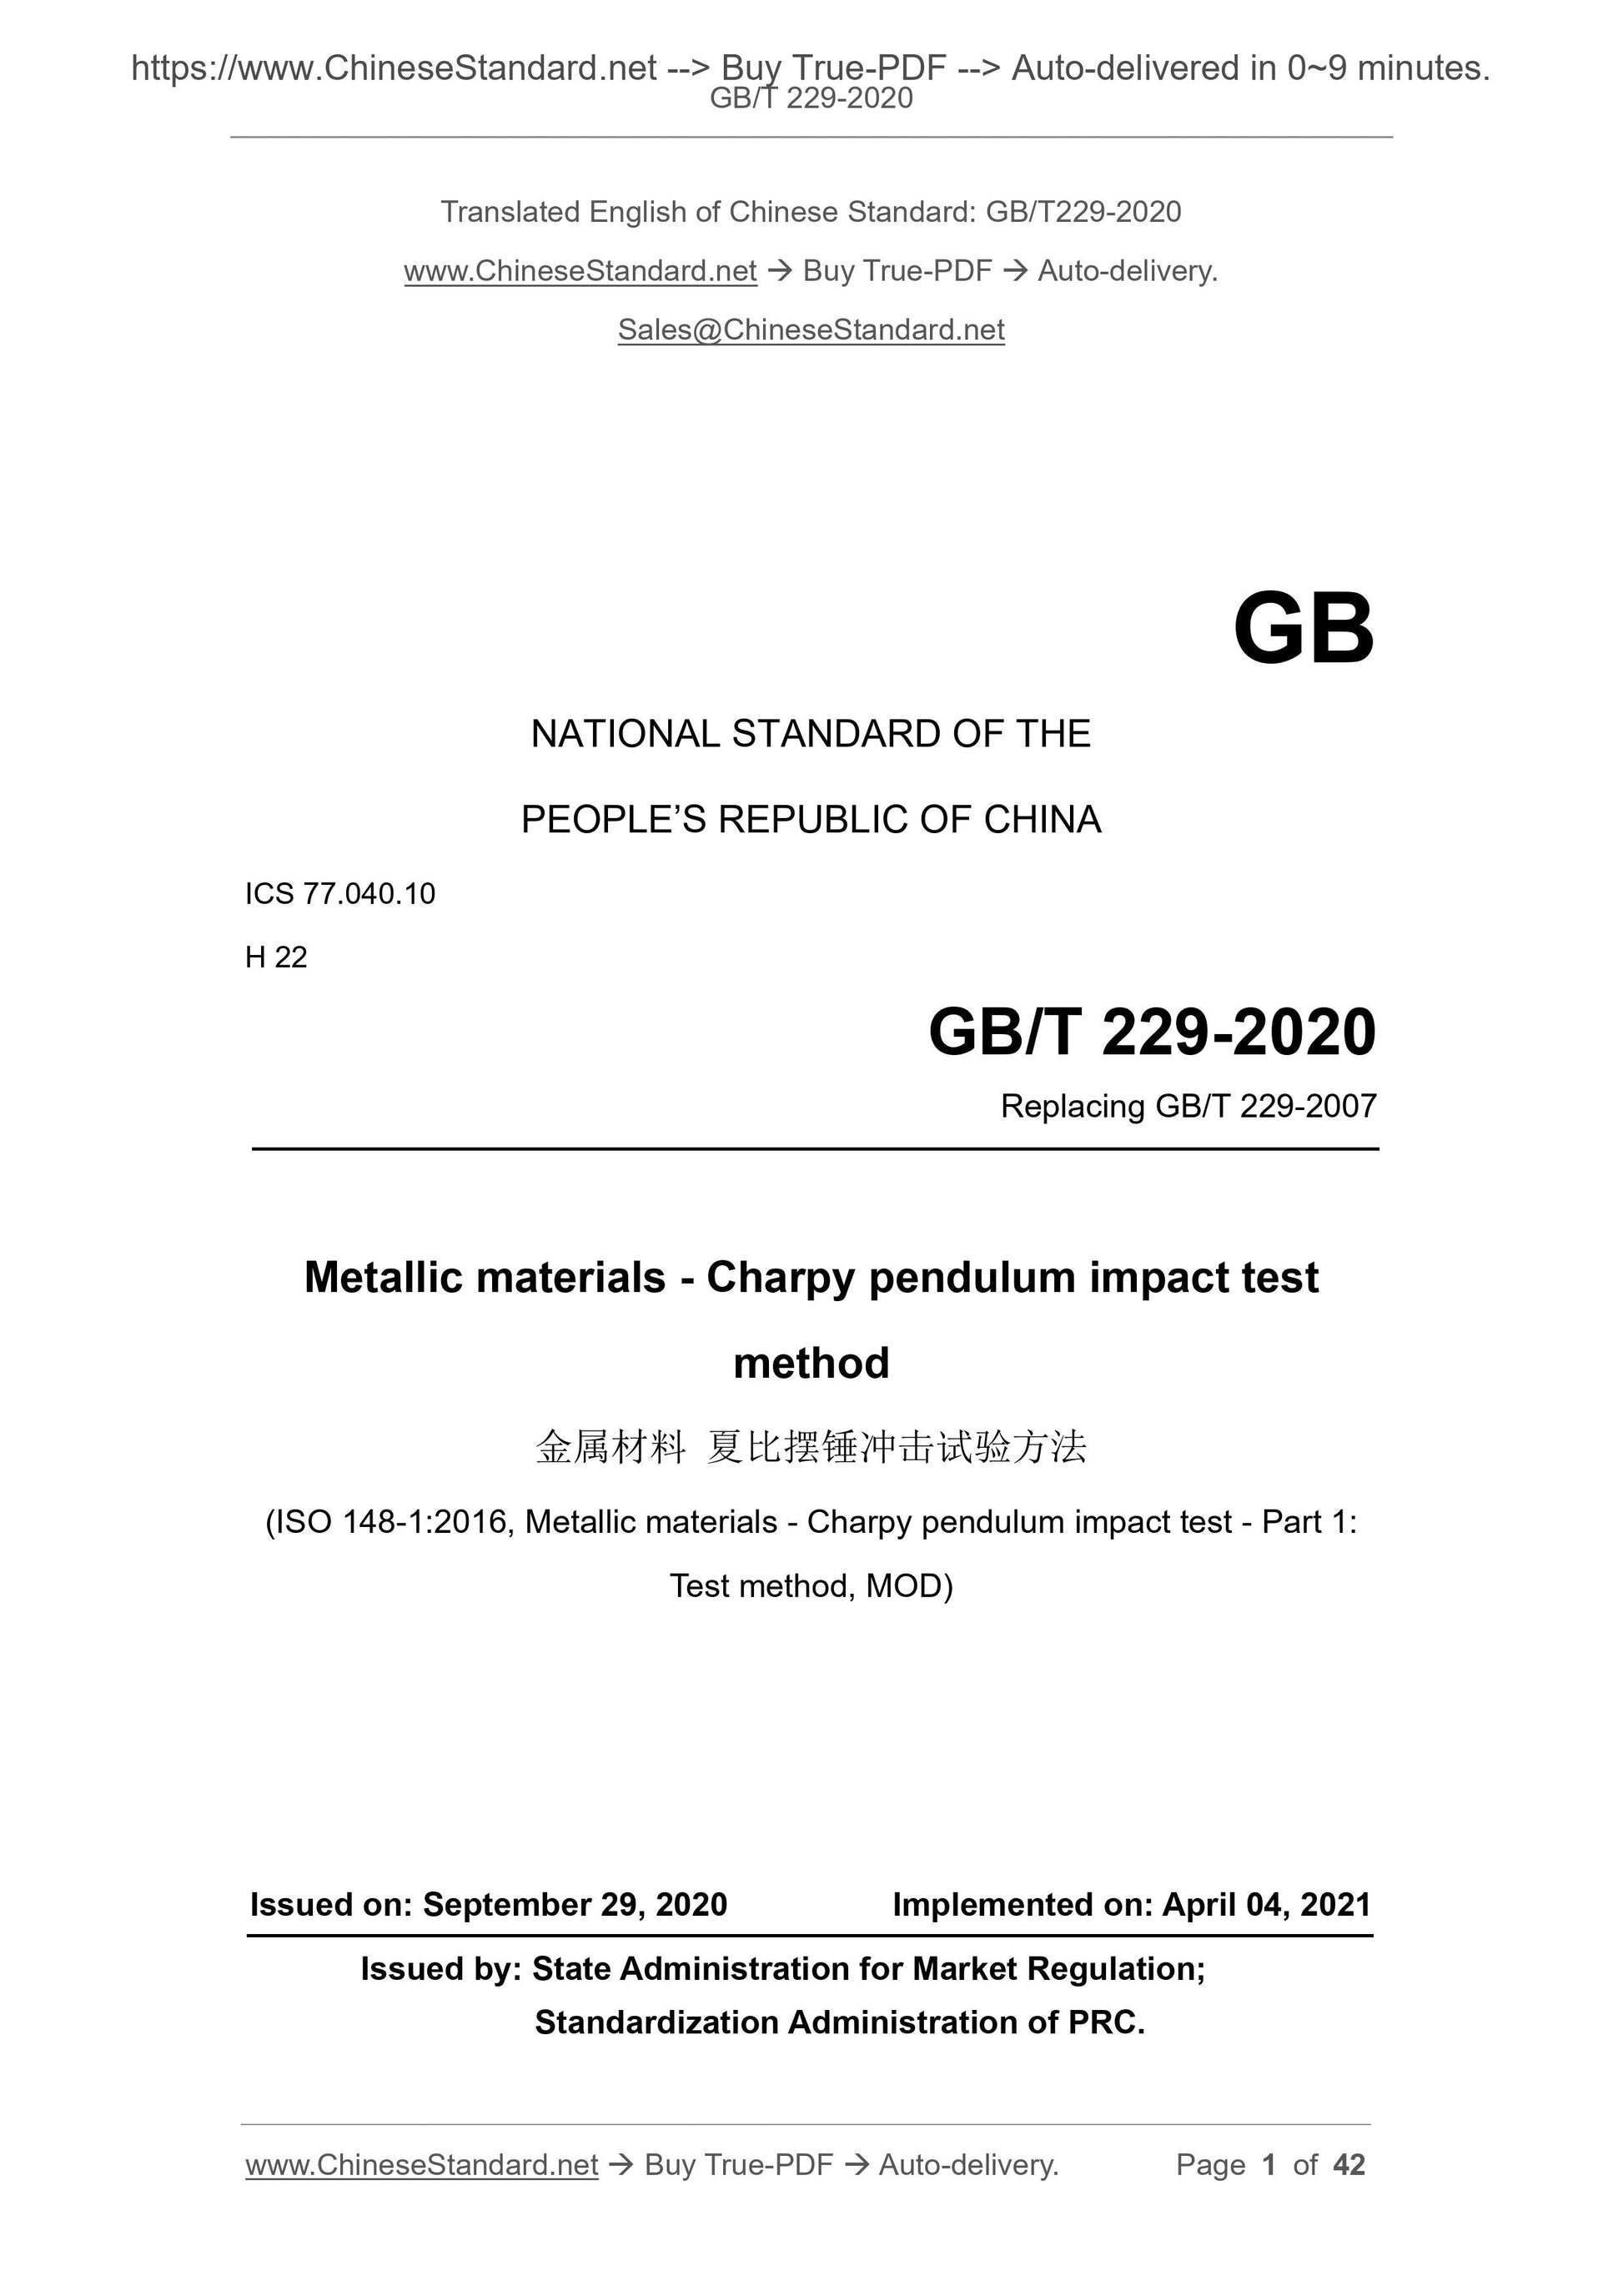 GB/T 229-2020 Page 1